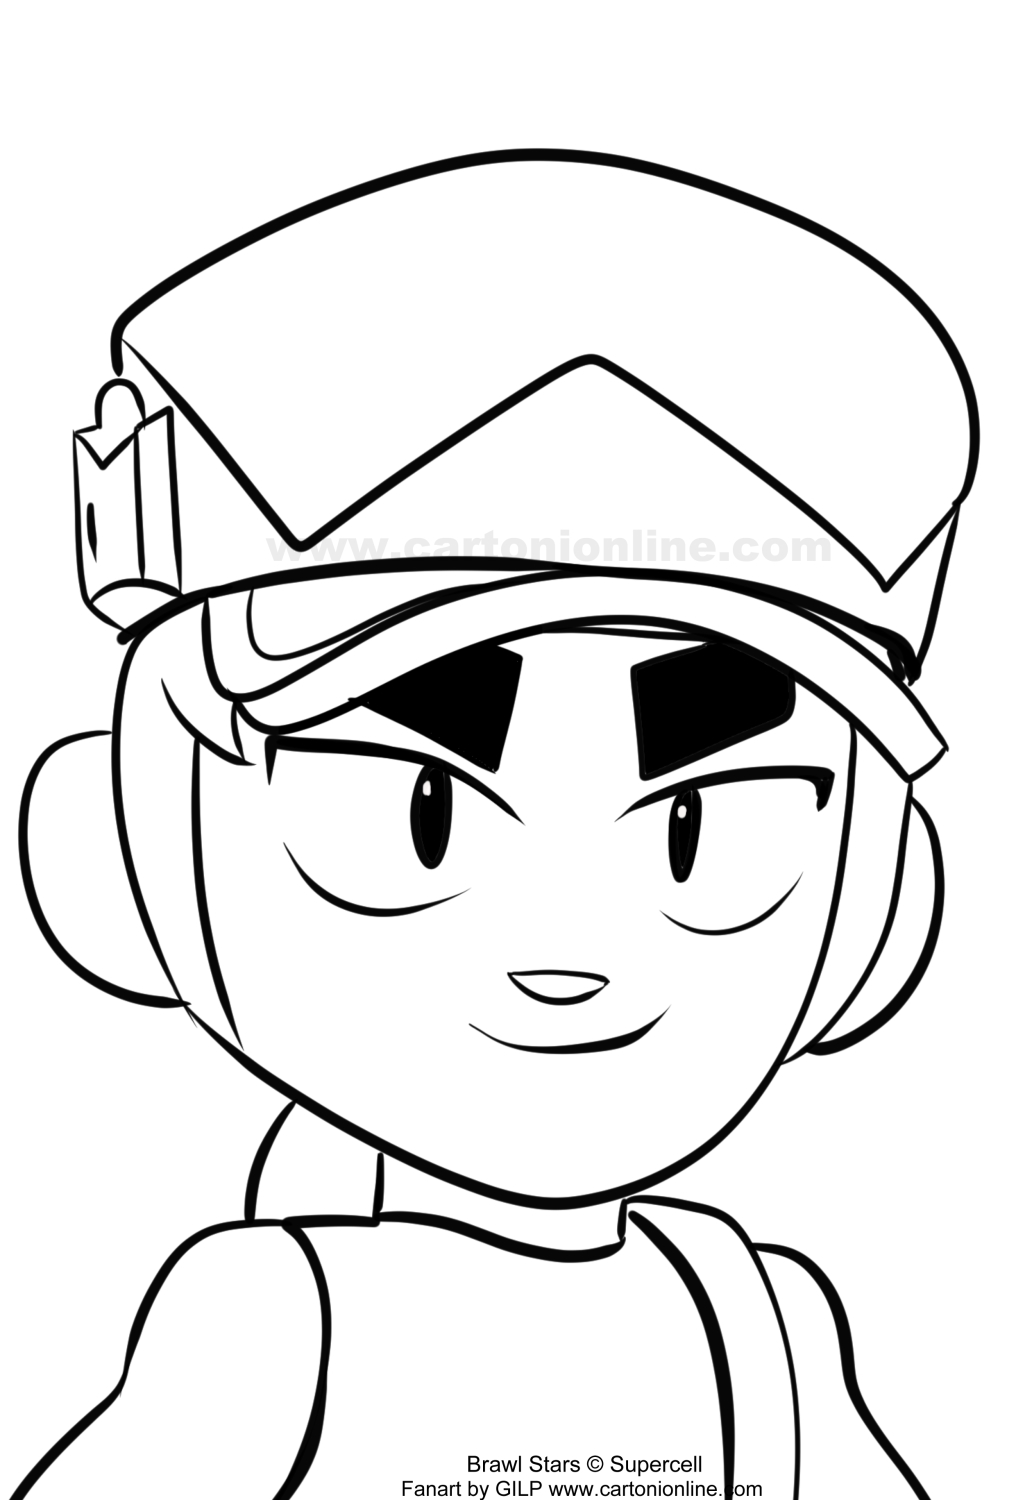 Fang 10 from Brawl Stars coloring page to print and coloring